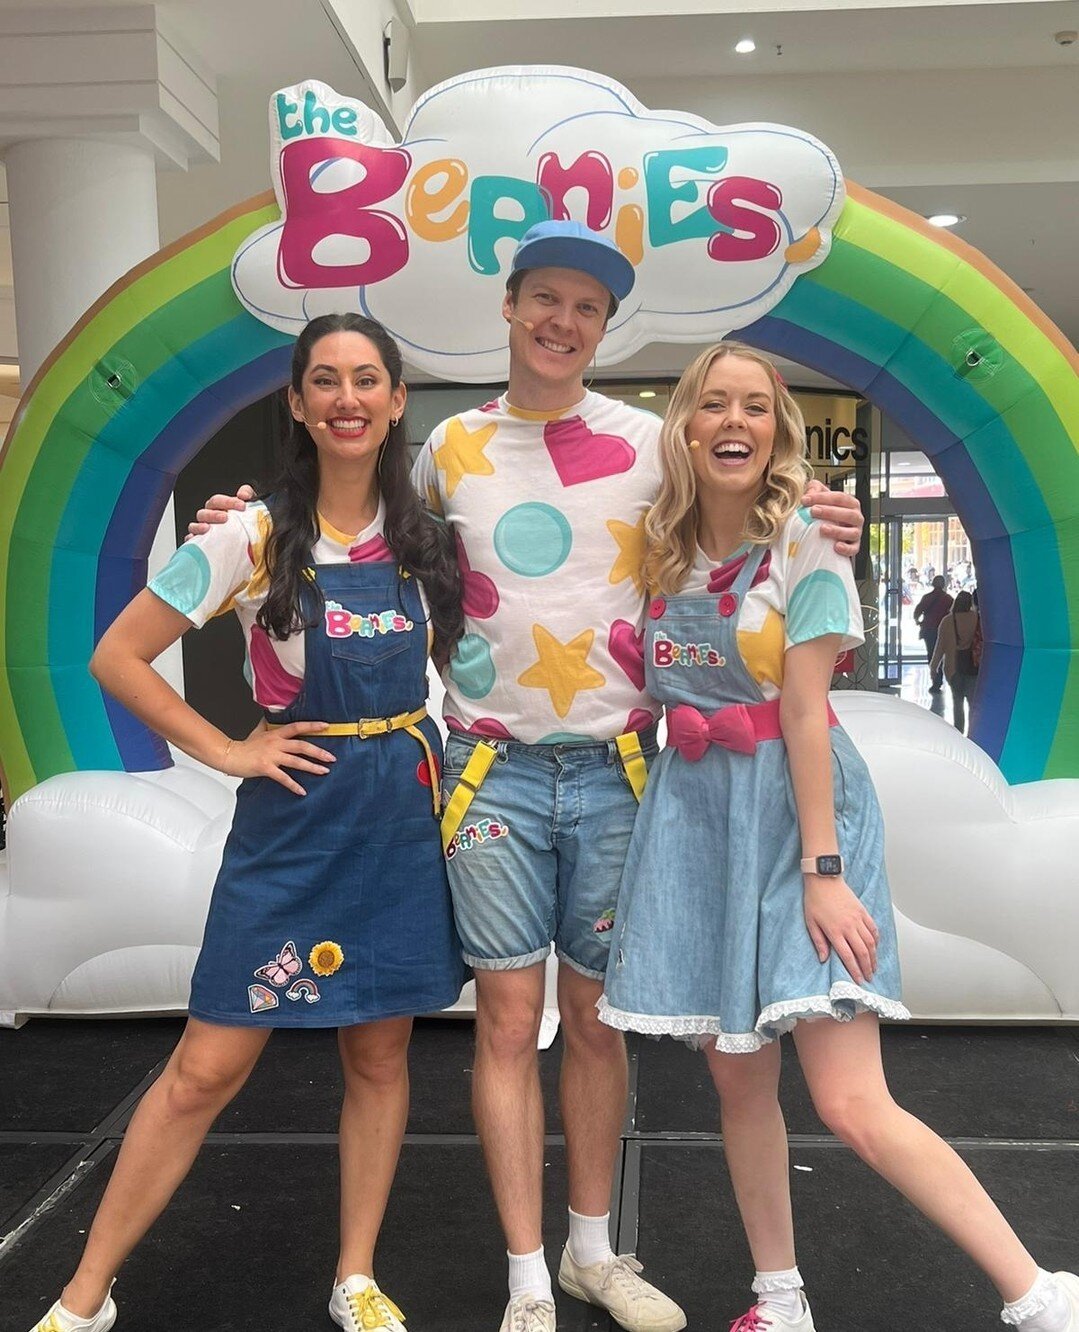 🎉🎤 Get ready to rock, Melbourne! 🎉🎤⁠
⁠
We've got a concert show coming your way TOMORROW! ⁠We will be performing live on stage at @eastland Shopping Centre⁠ at 10am on April 14th. You'll get to enjoy our favourite songs from ABC Kids TV (and we'l